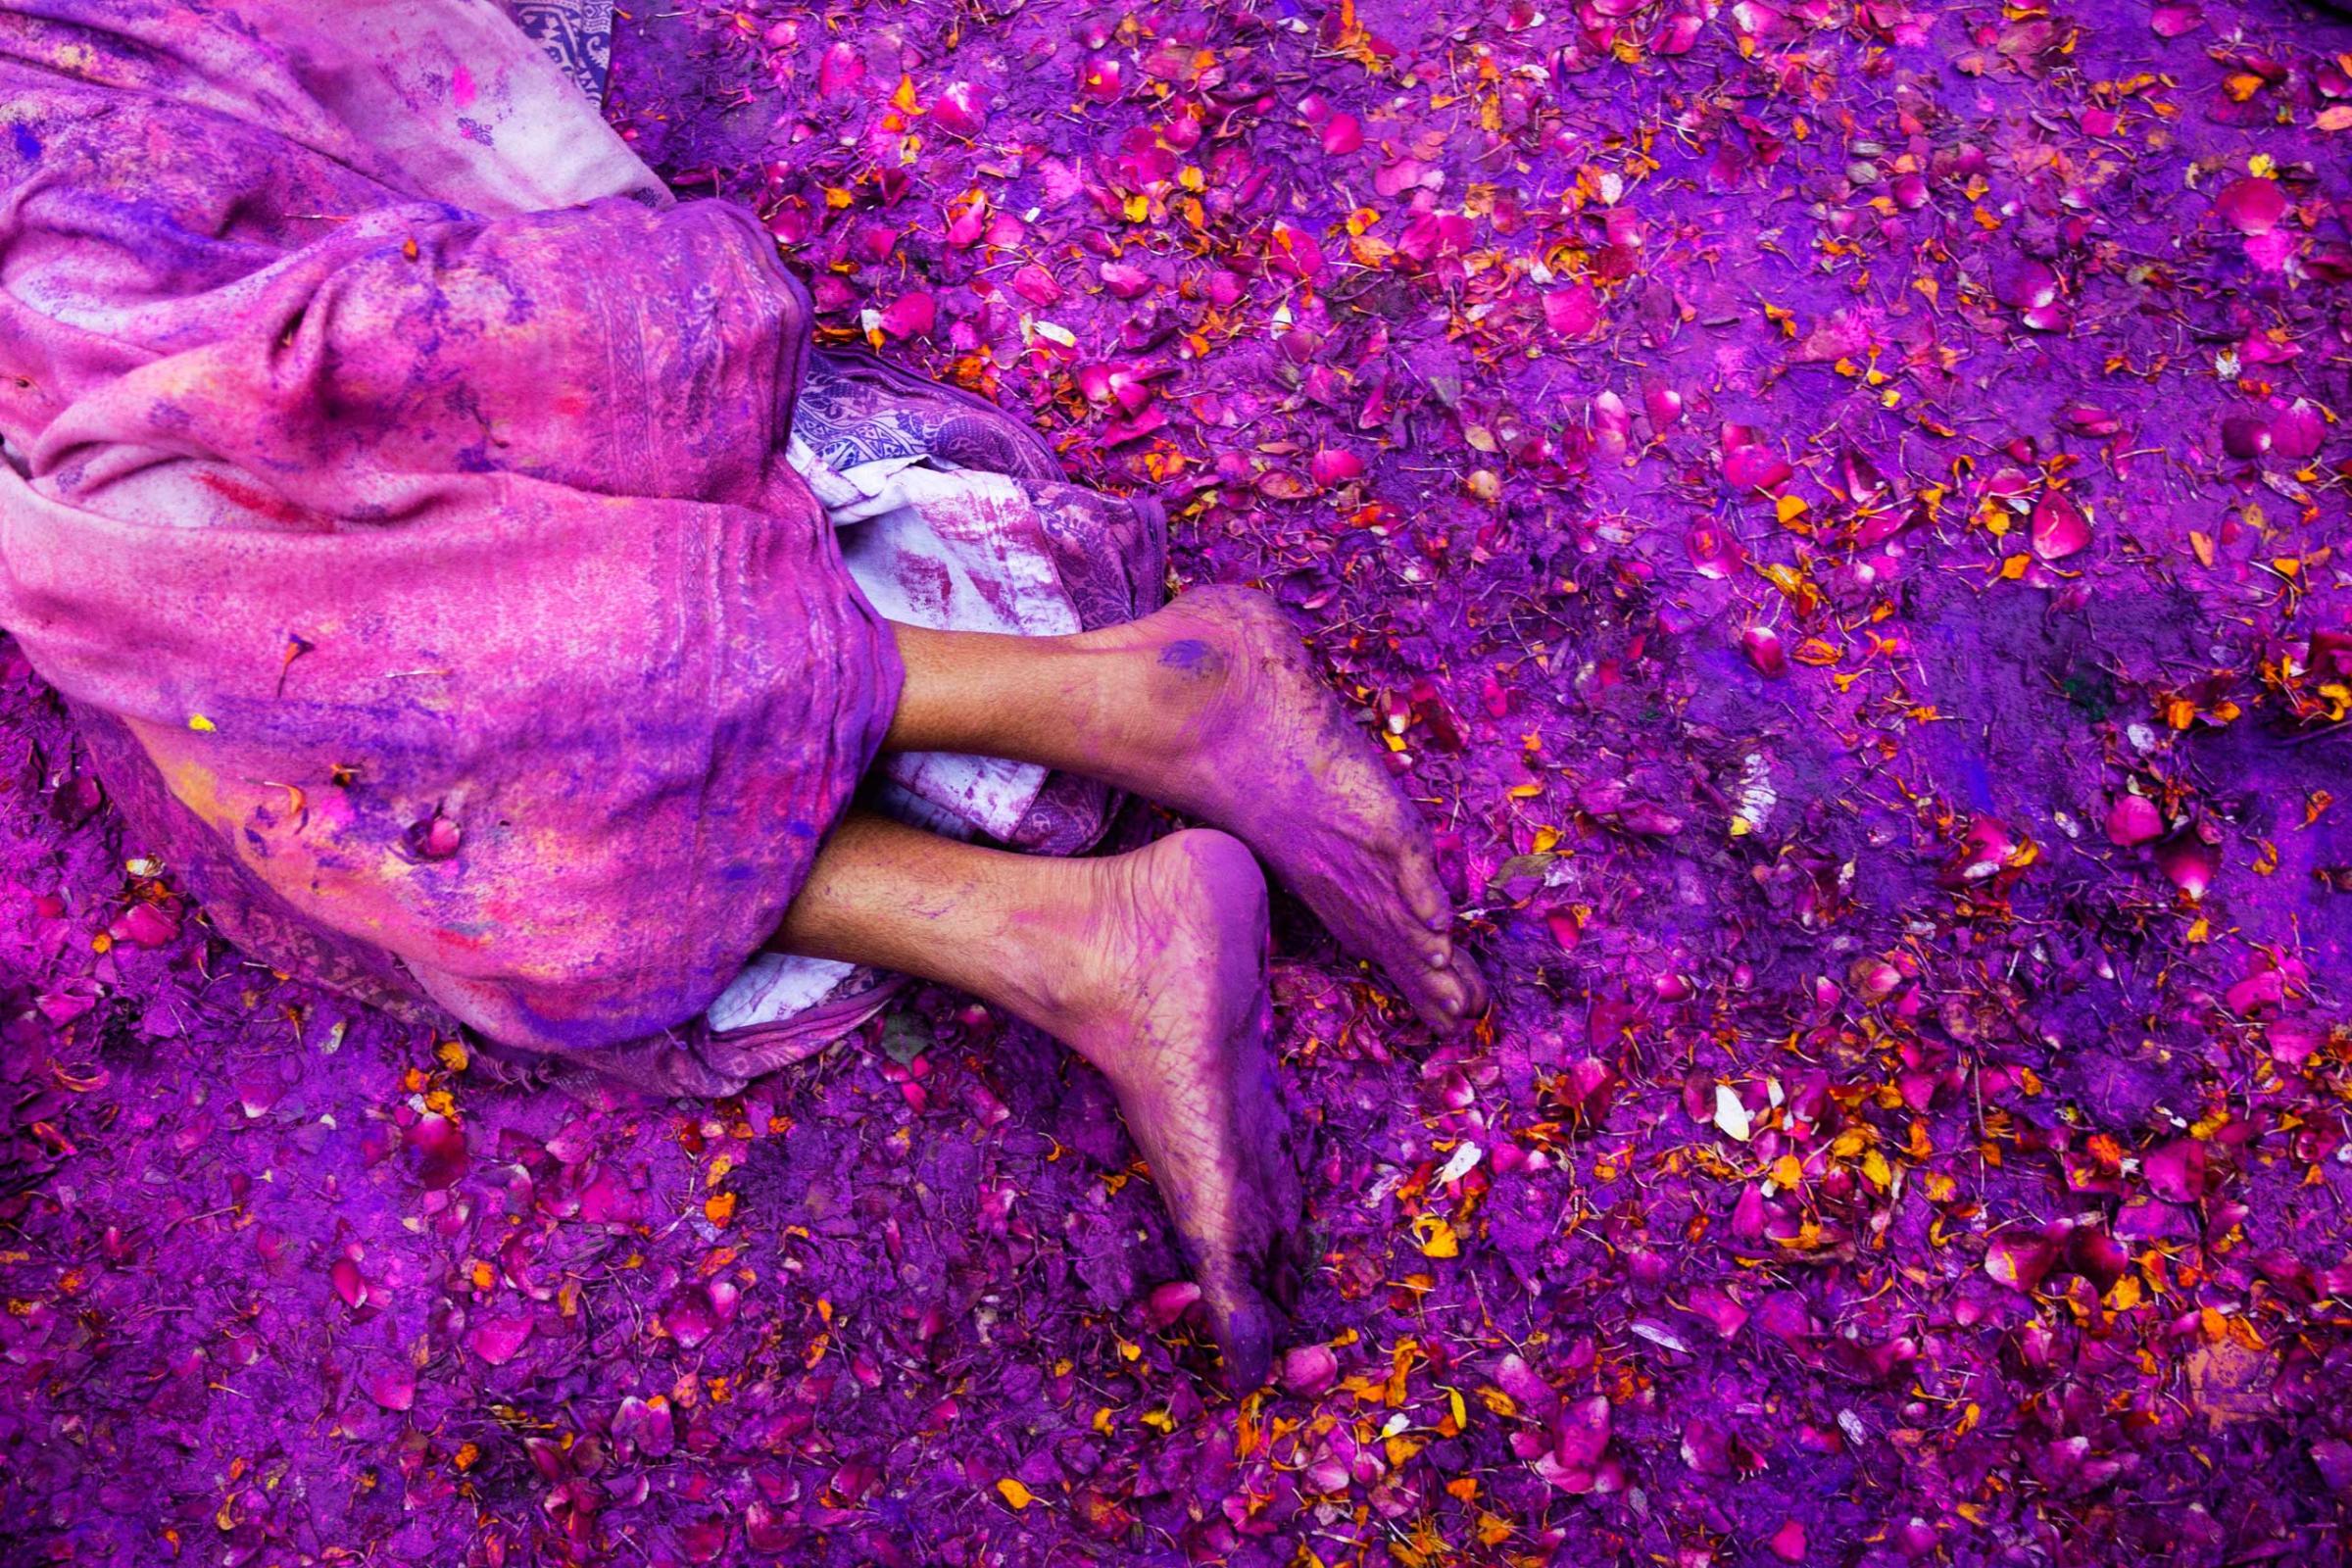 A Hindu widow lies on a sludgy ground filled with a mixture of colored powder, water and flower petals during celebrations to mark Holi, the Hindu festival of colors, at the Meera Sahabhagini Widow Ashram in Vrindavan, India, March 3, 2015.